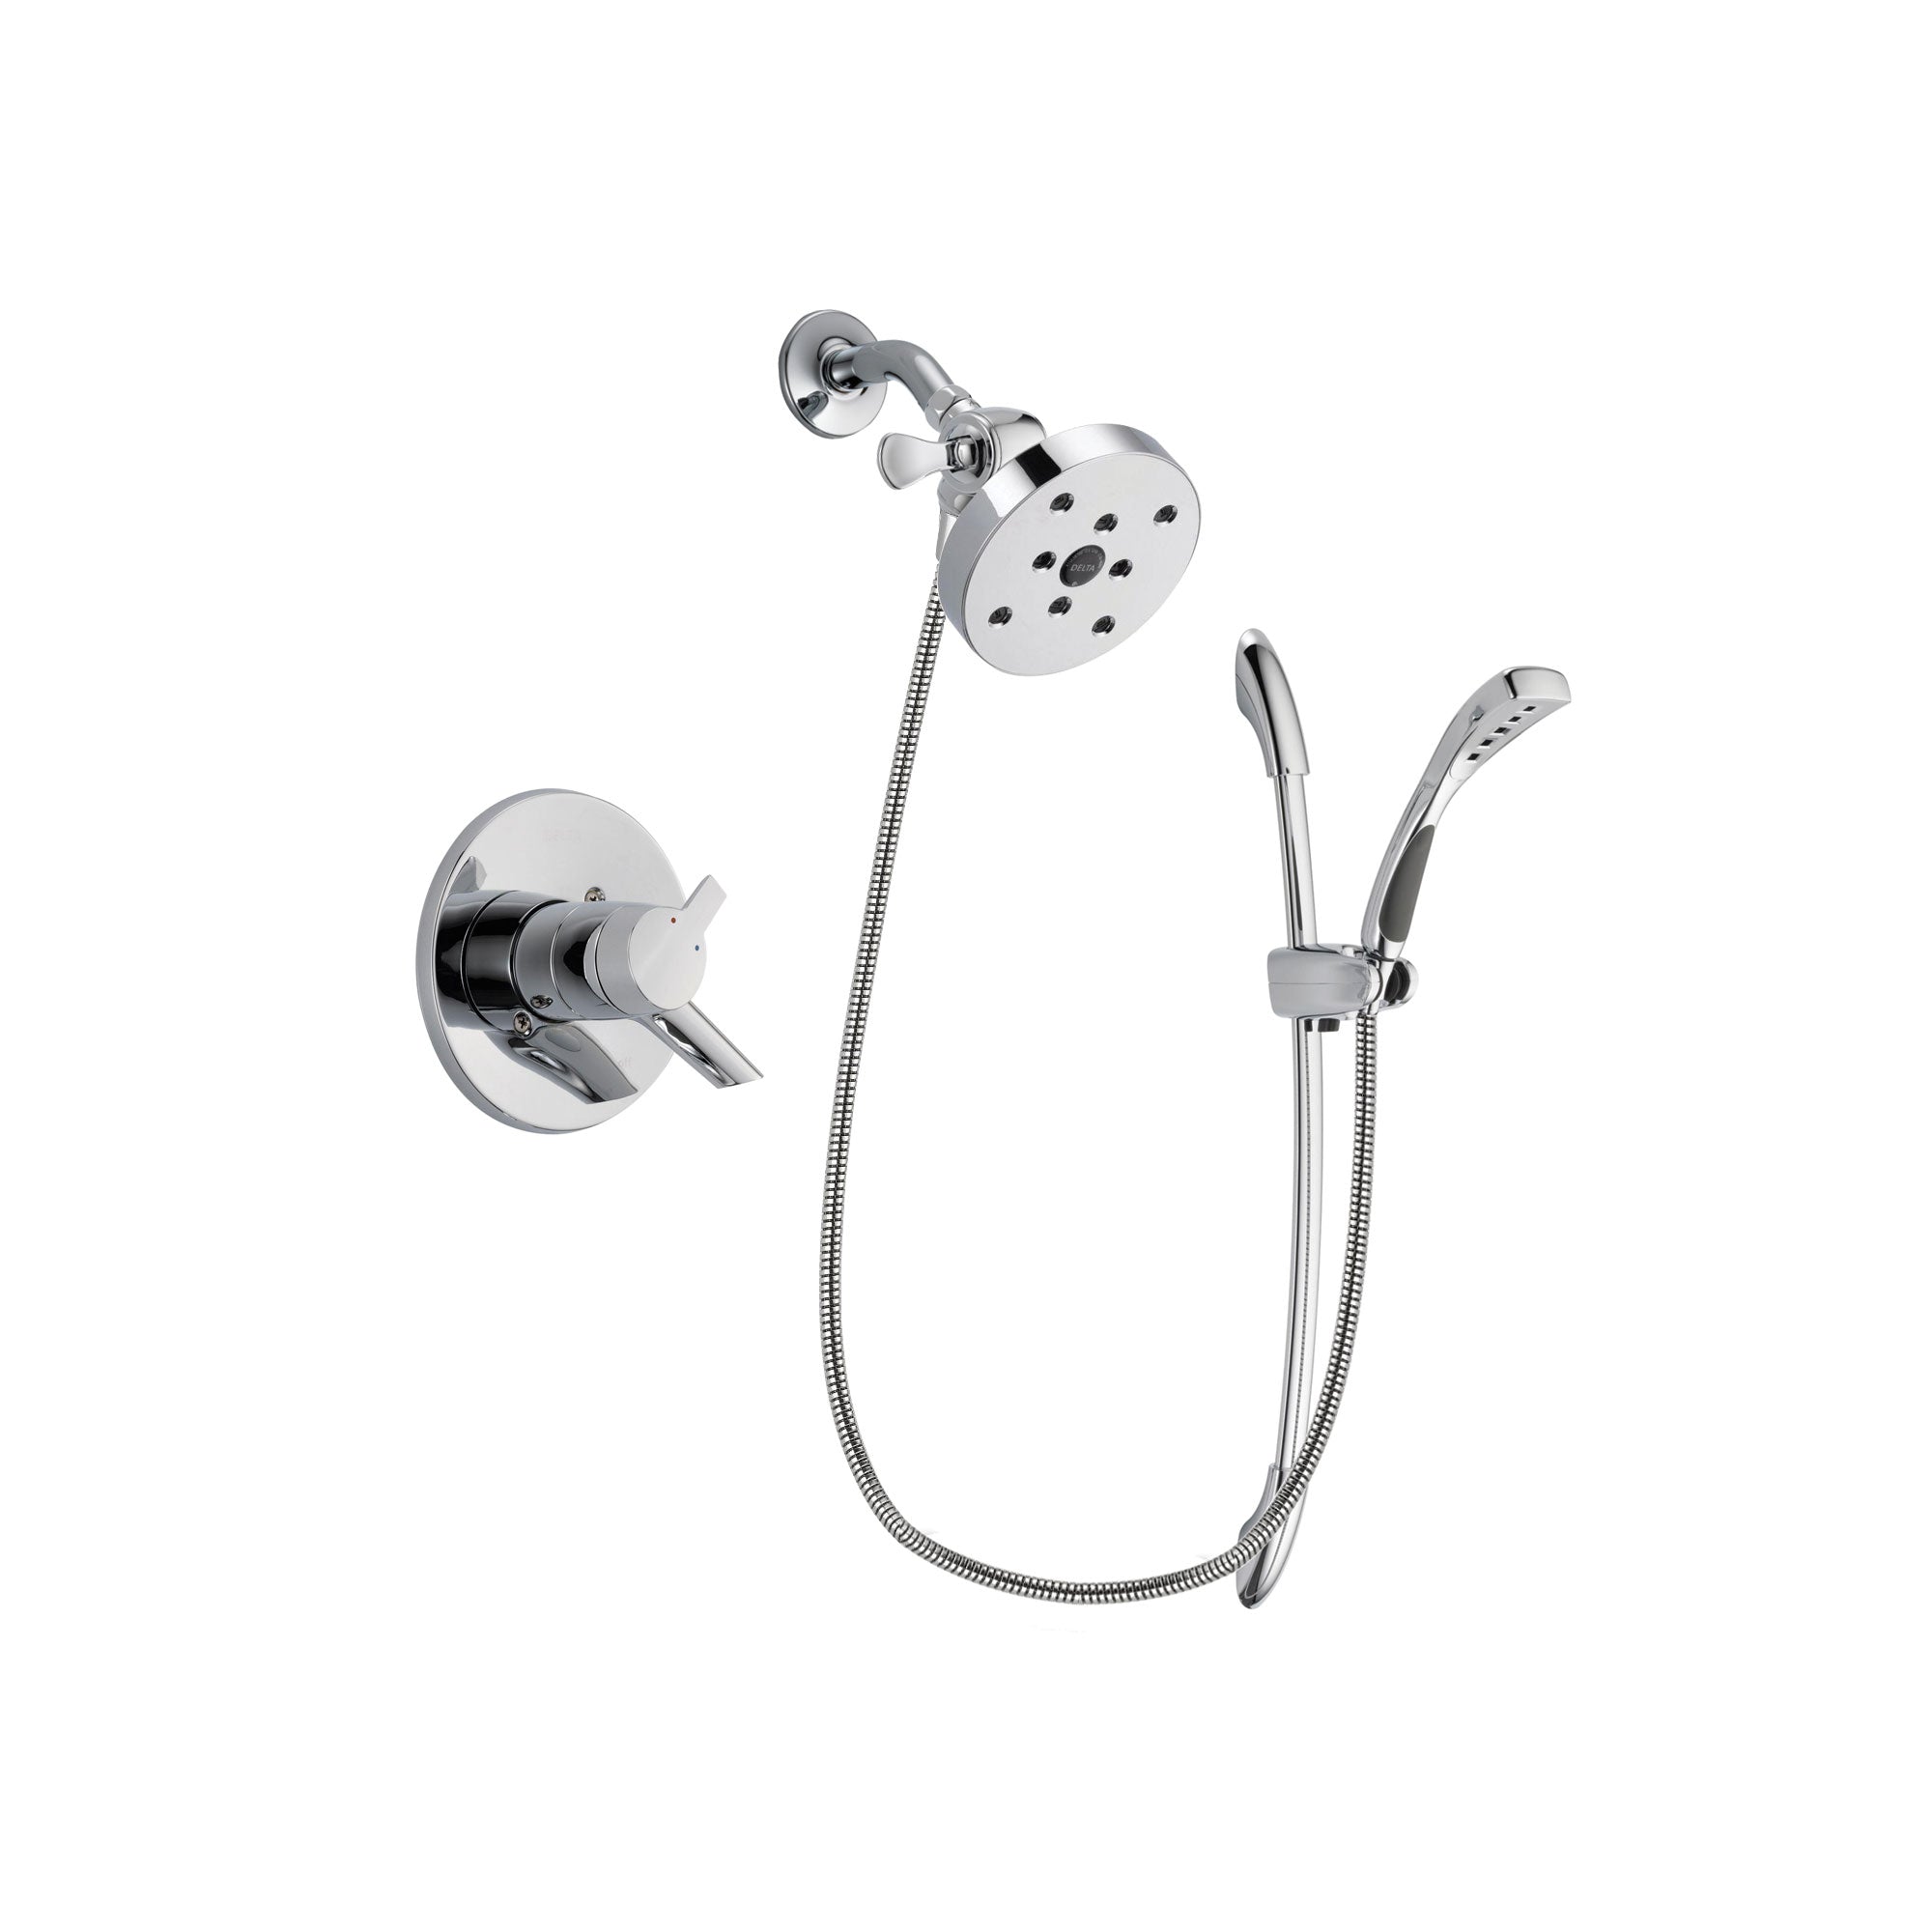 Delta Compel Chrome Finish Dual Control Shower Faucet System Package with 5-1/2 inch Shower Head and Handheld Shower with Slide Bar Includes Rough-in Valve DSP0552V